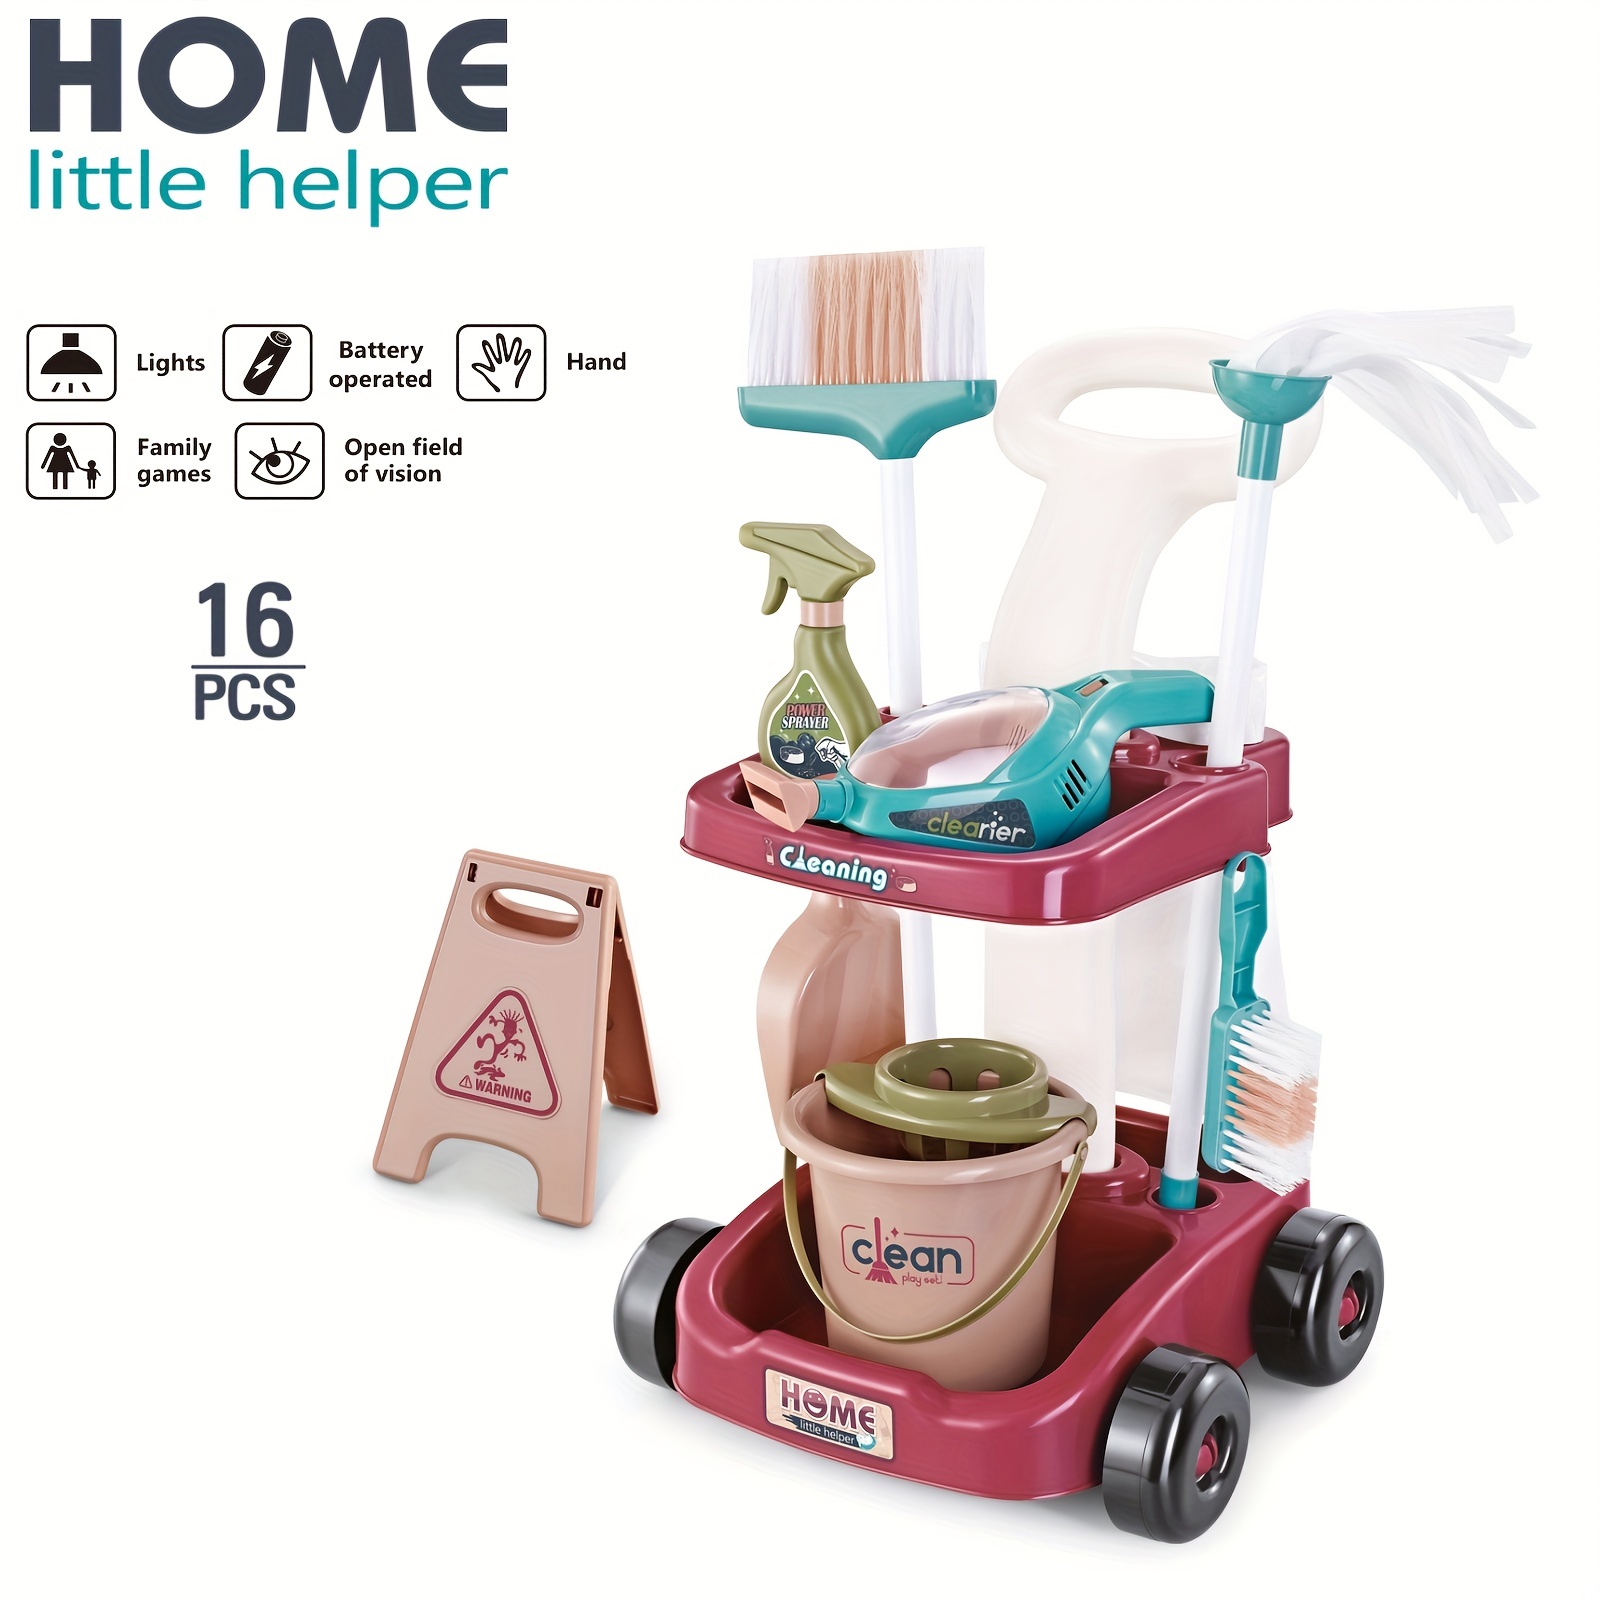 Kids' Pretend Play Cleaning Toy Set With Vacuum, Broom, Mop, Cleaning Car,  Tool Kit For Cleaning And Housekeeping